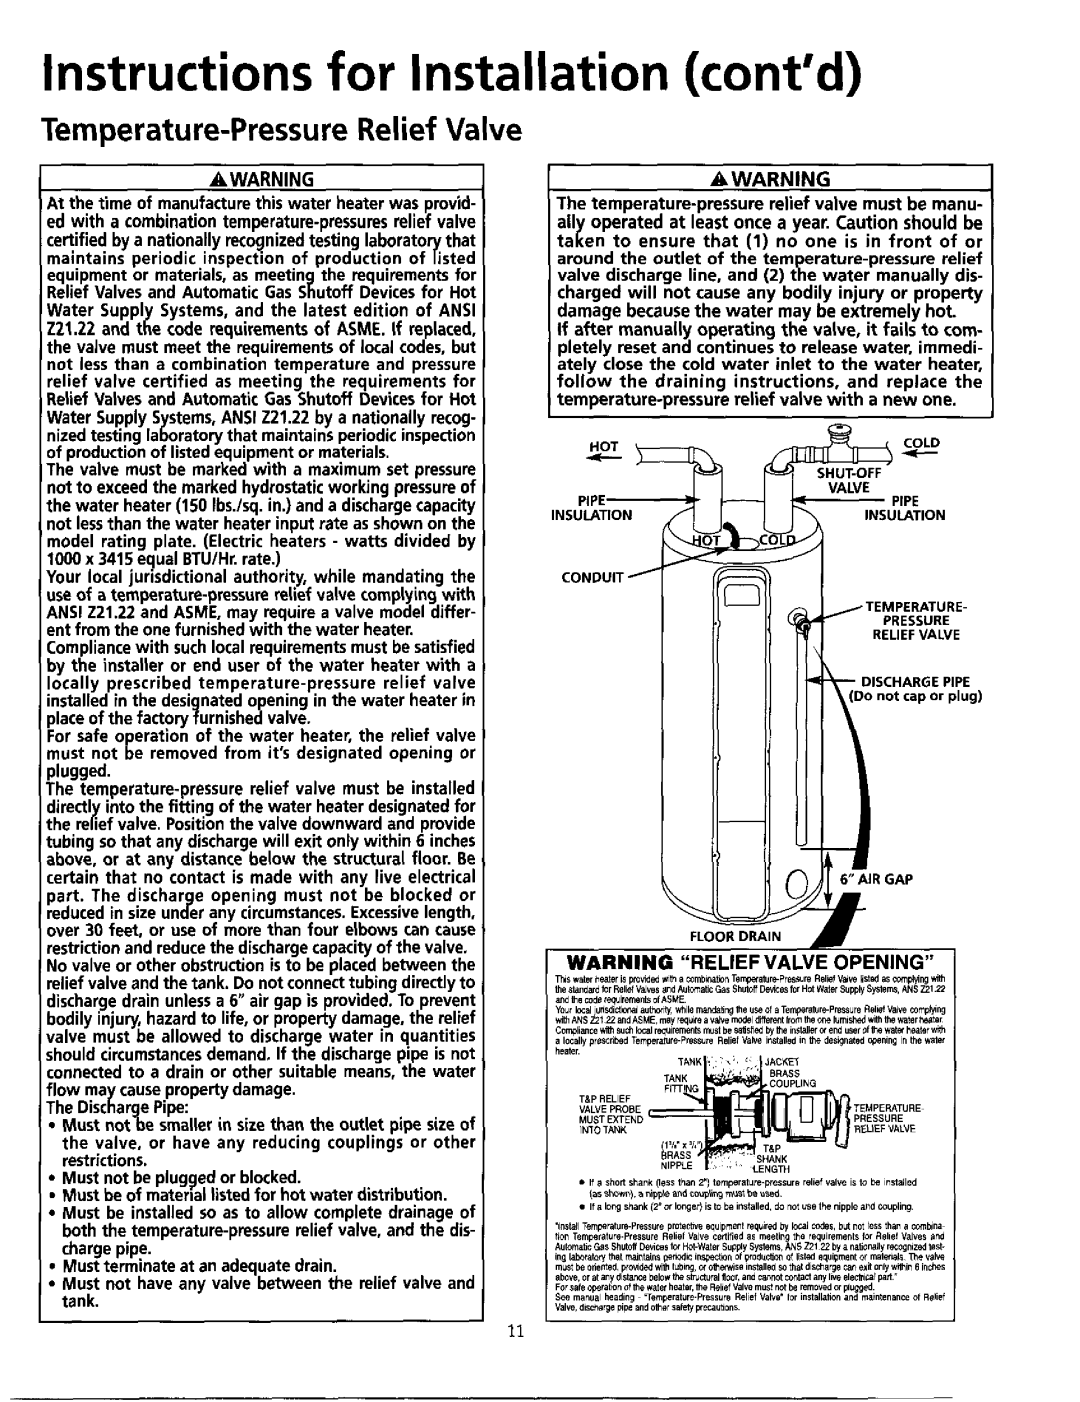 Maytag HE21282PC, HE21250PC operating instructions Temperature-PressureRelief Valve, Instructions for Installation contd 